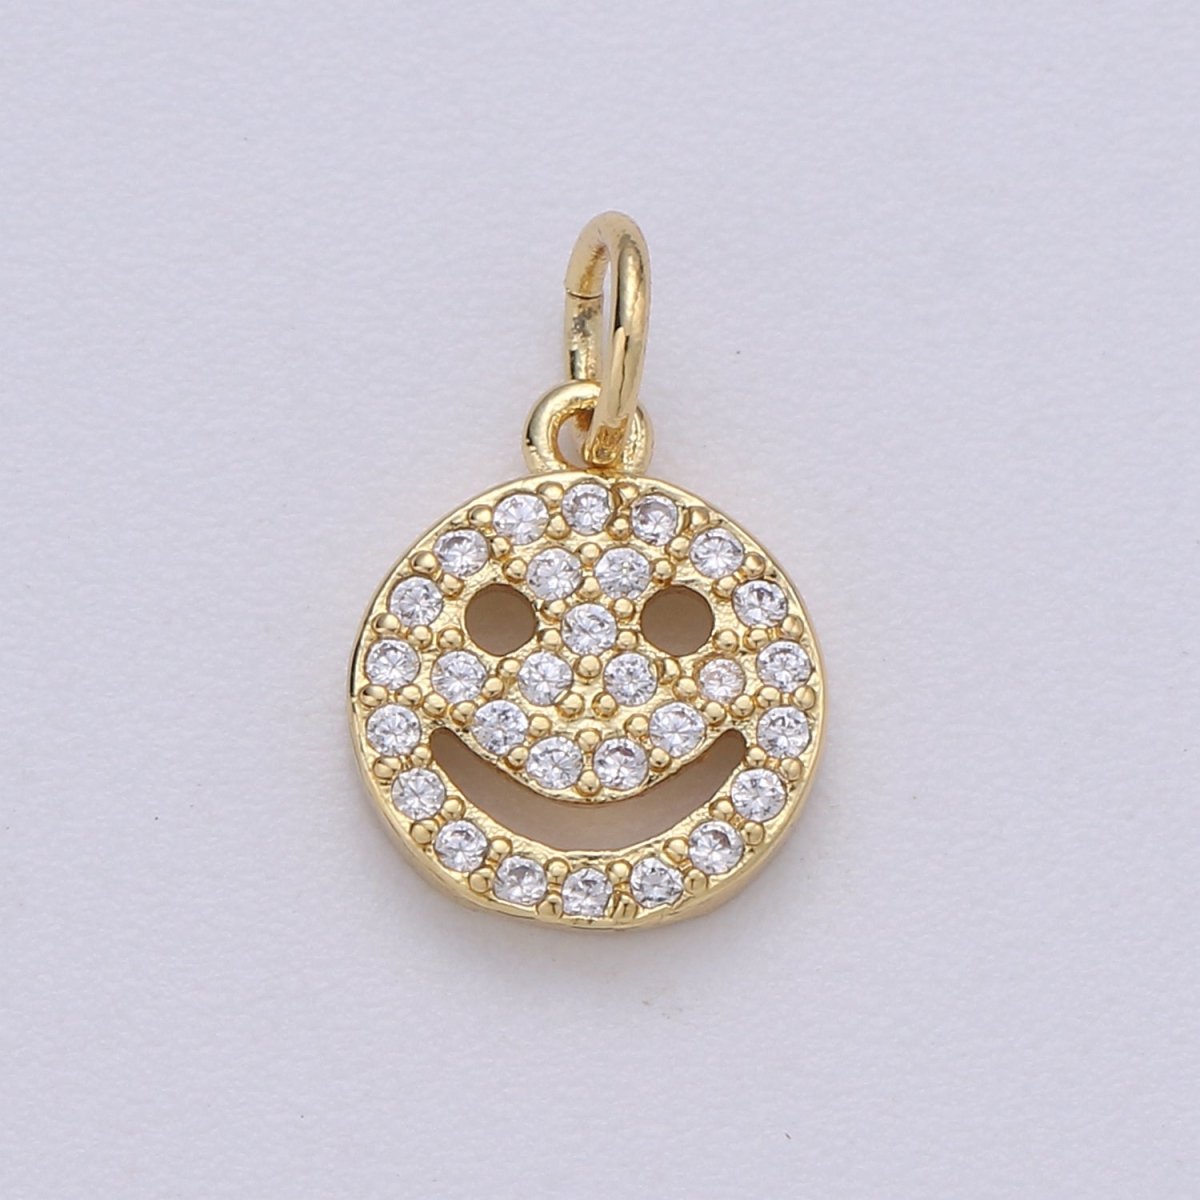 Micro Pave Charm Dainty Smile coin Mini Happy Smile pendant Gold Smiley Face 14k Gold Filled Emoji Charm Bracelet Earring Necklace Component D-667 - DLUXCA